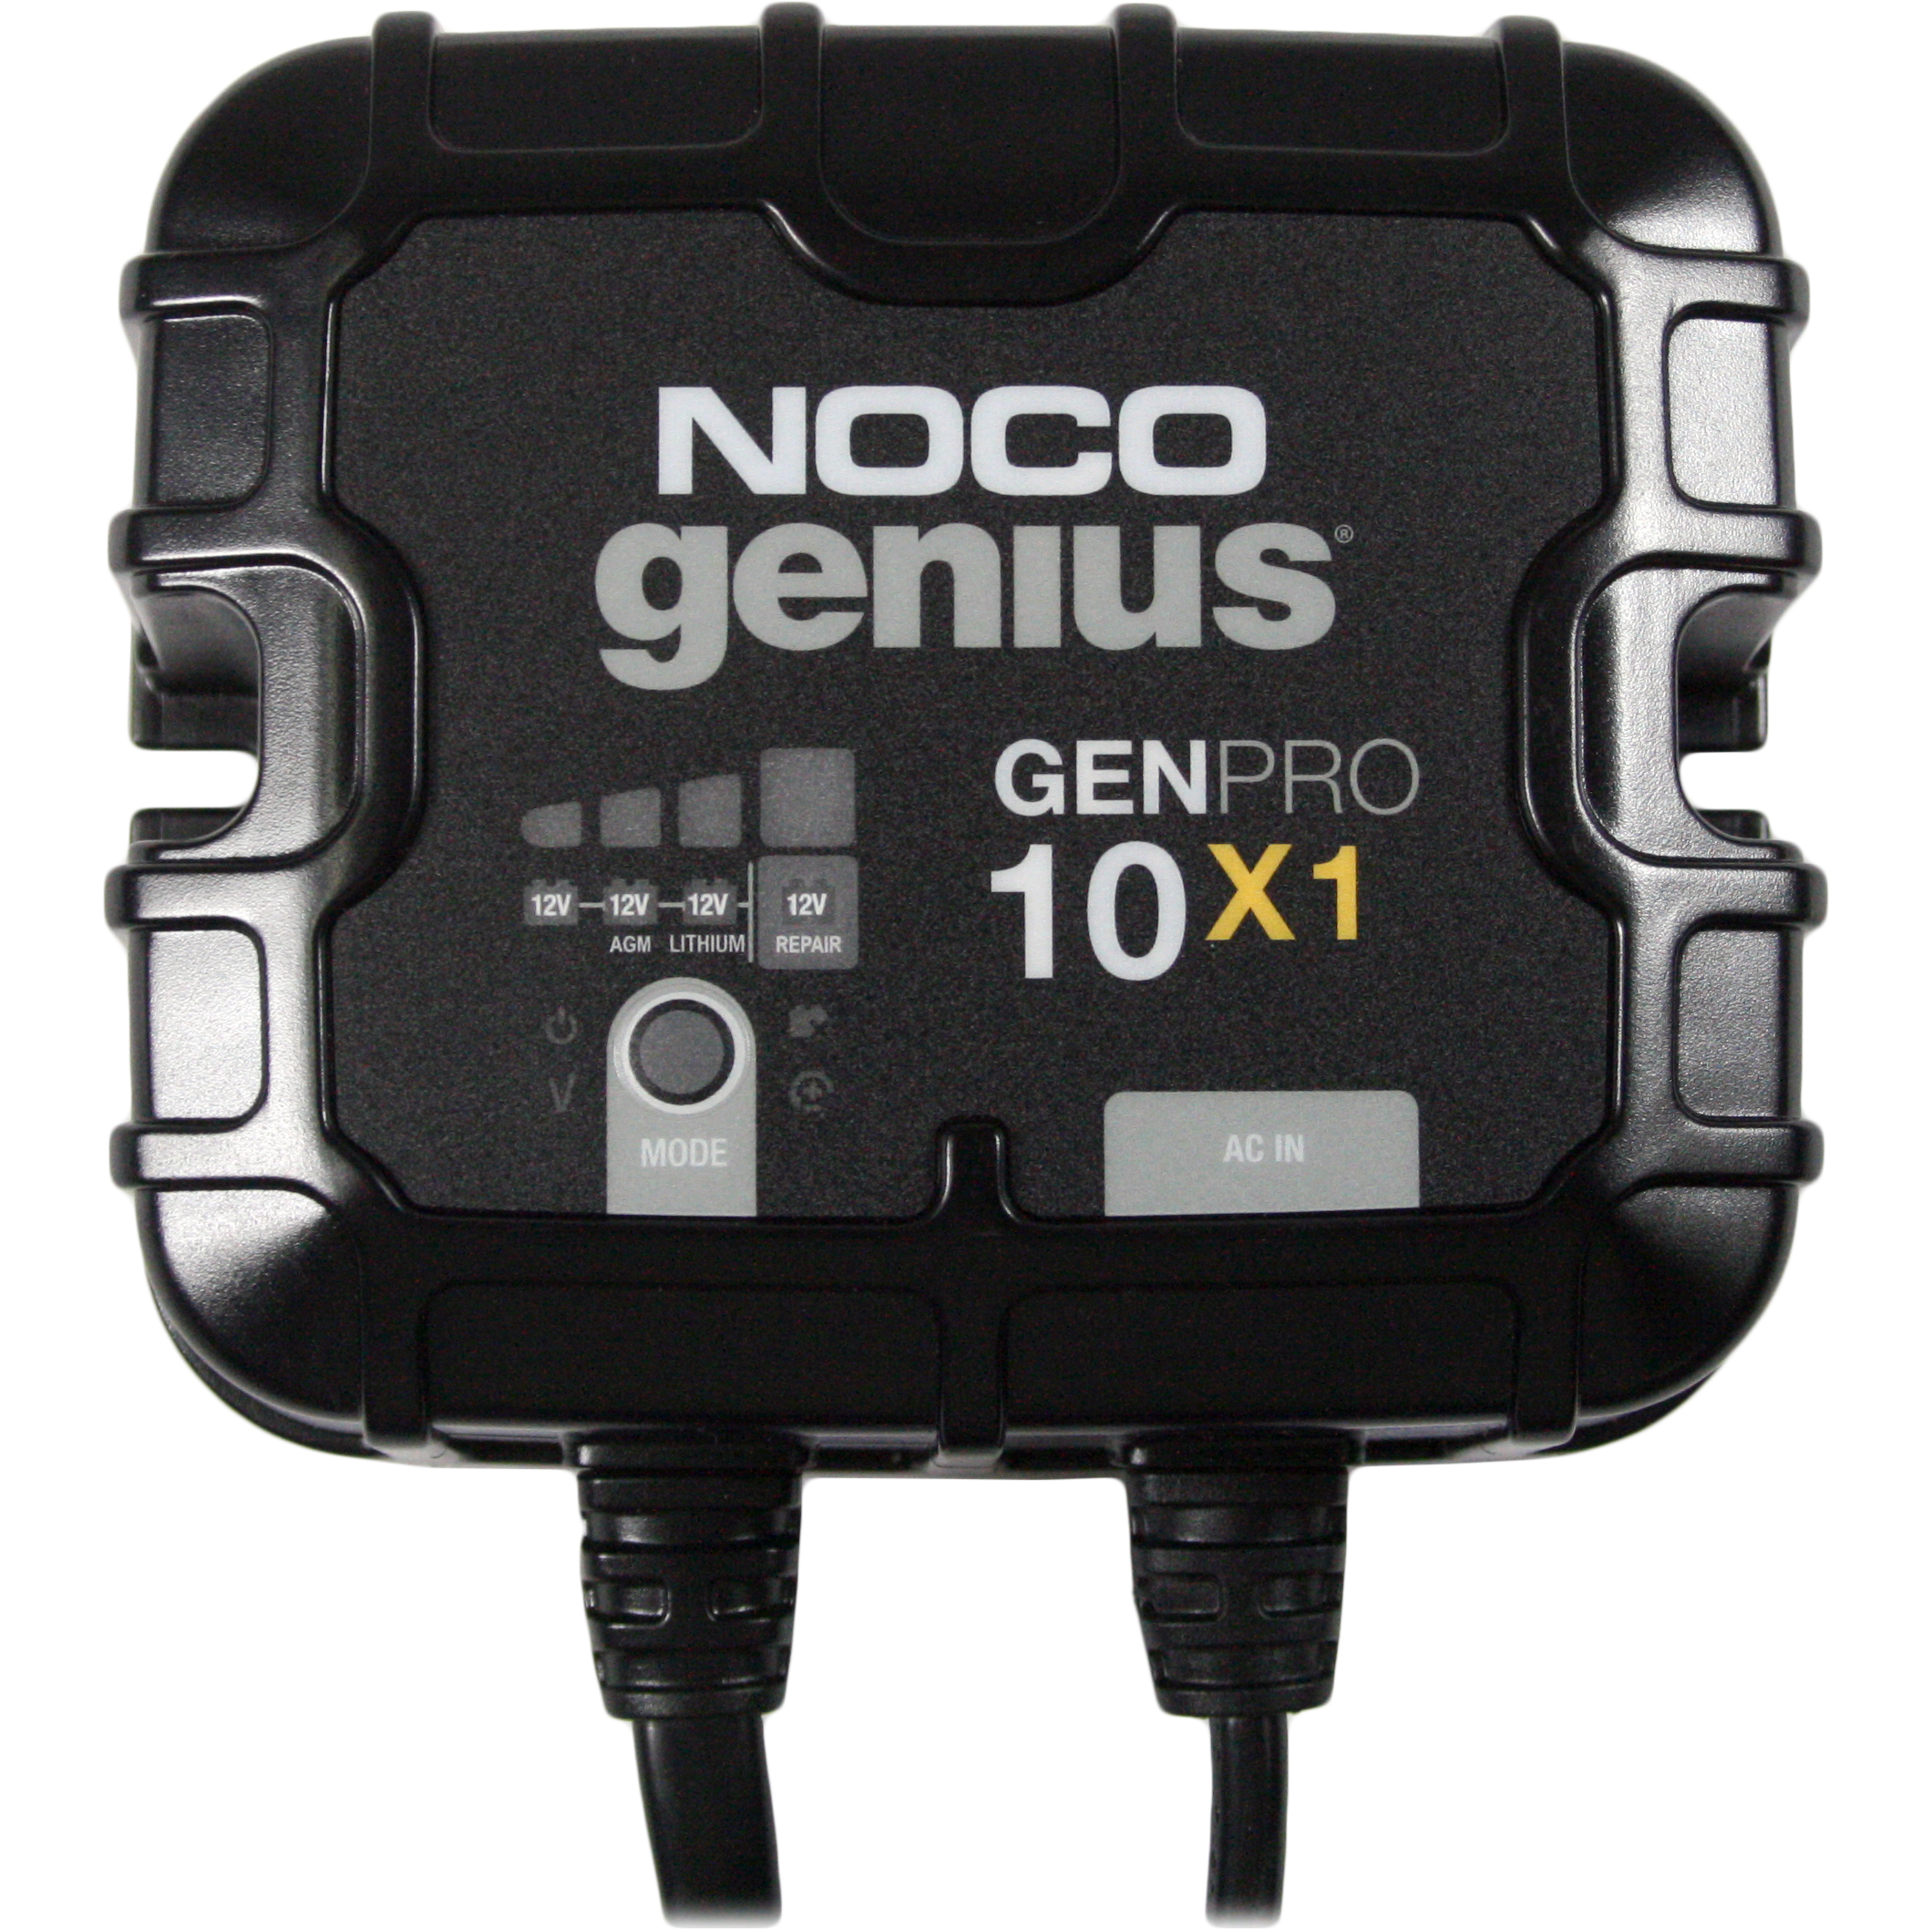 NOCO Genius GENPRO10X1 12V 10A On-Board Battery Charger